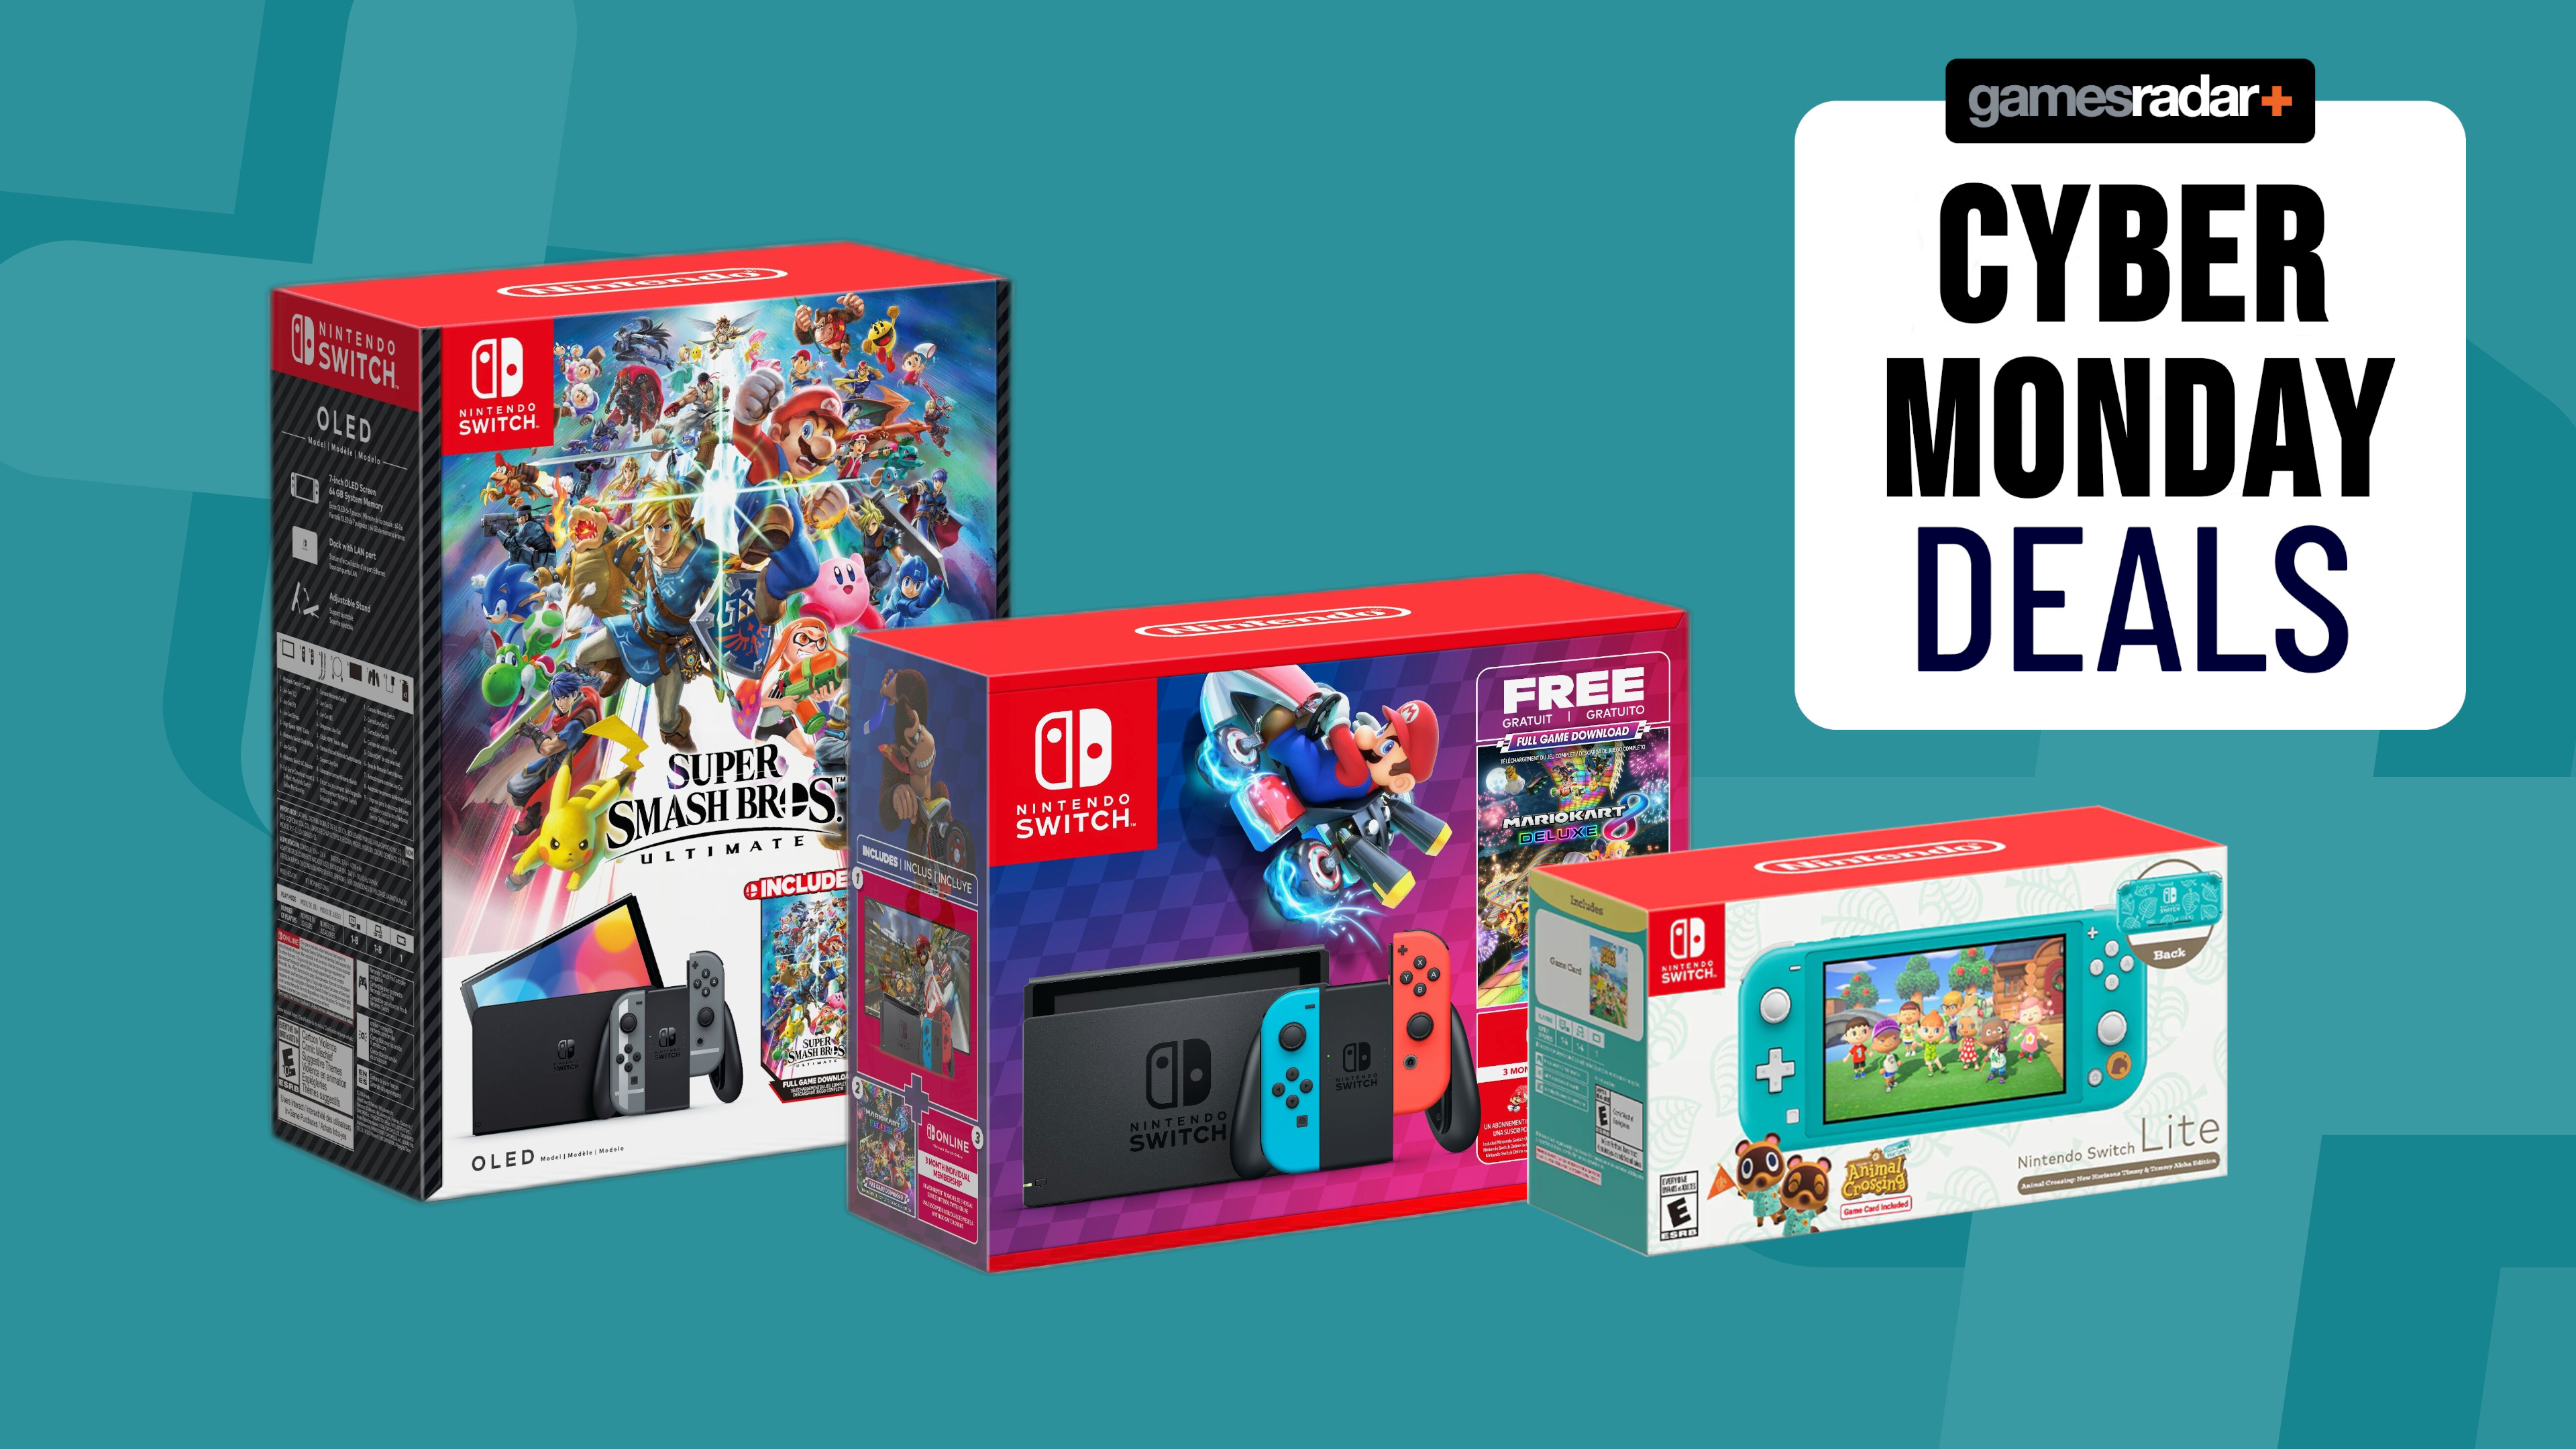 Nintendo Switch bundles on a blue background with Cyber Monday badge